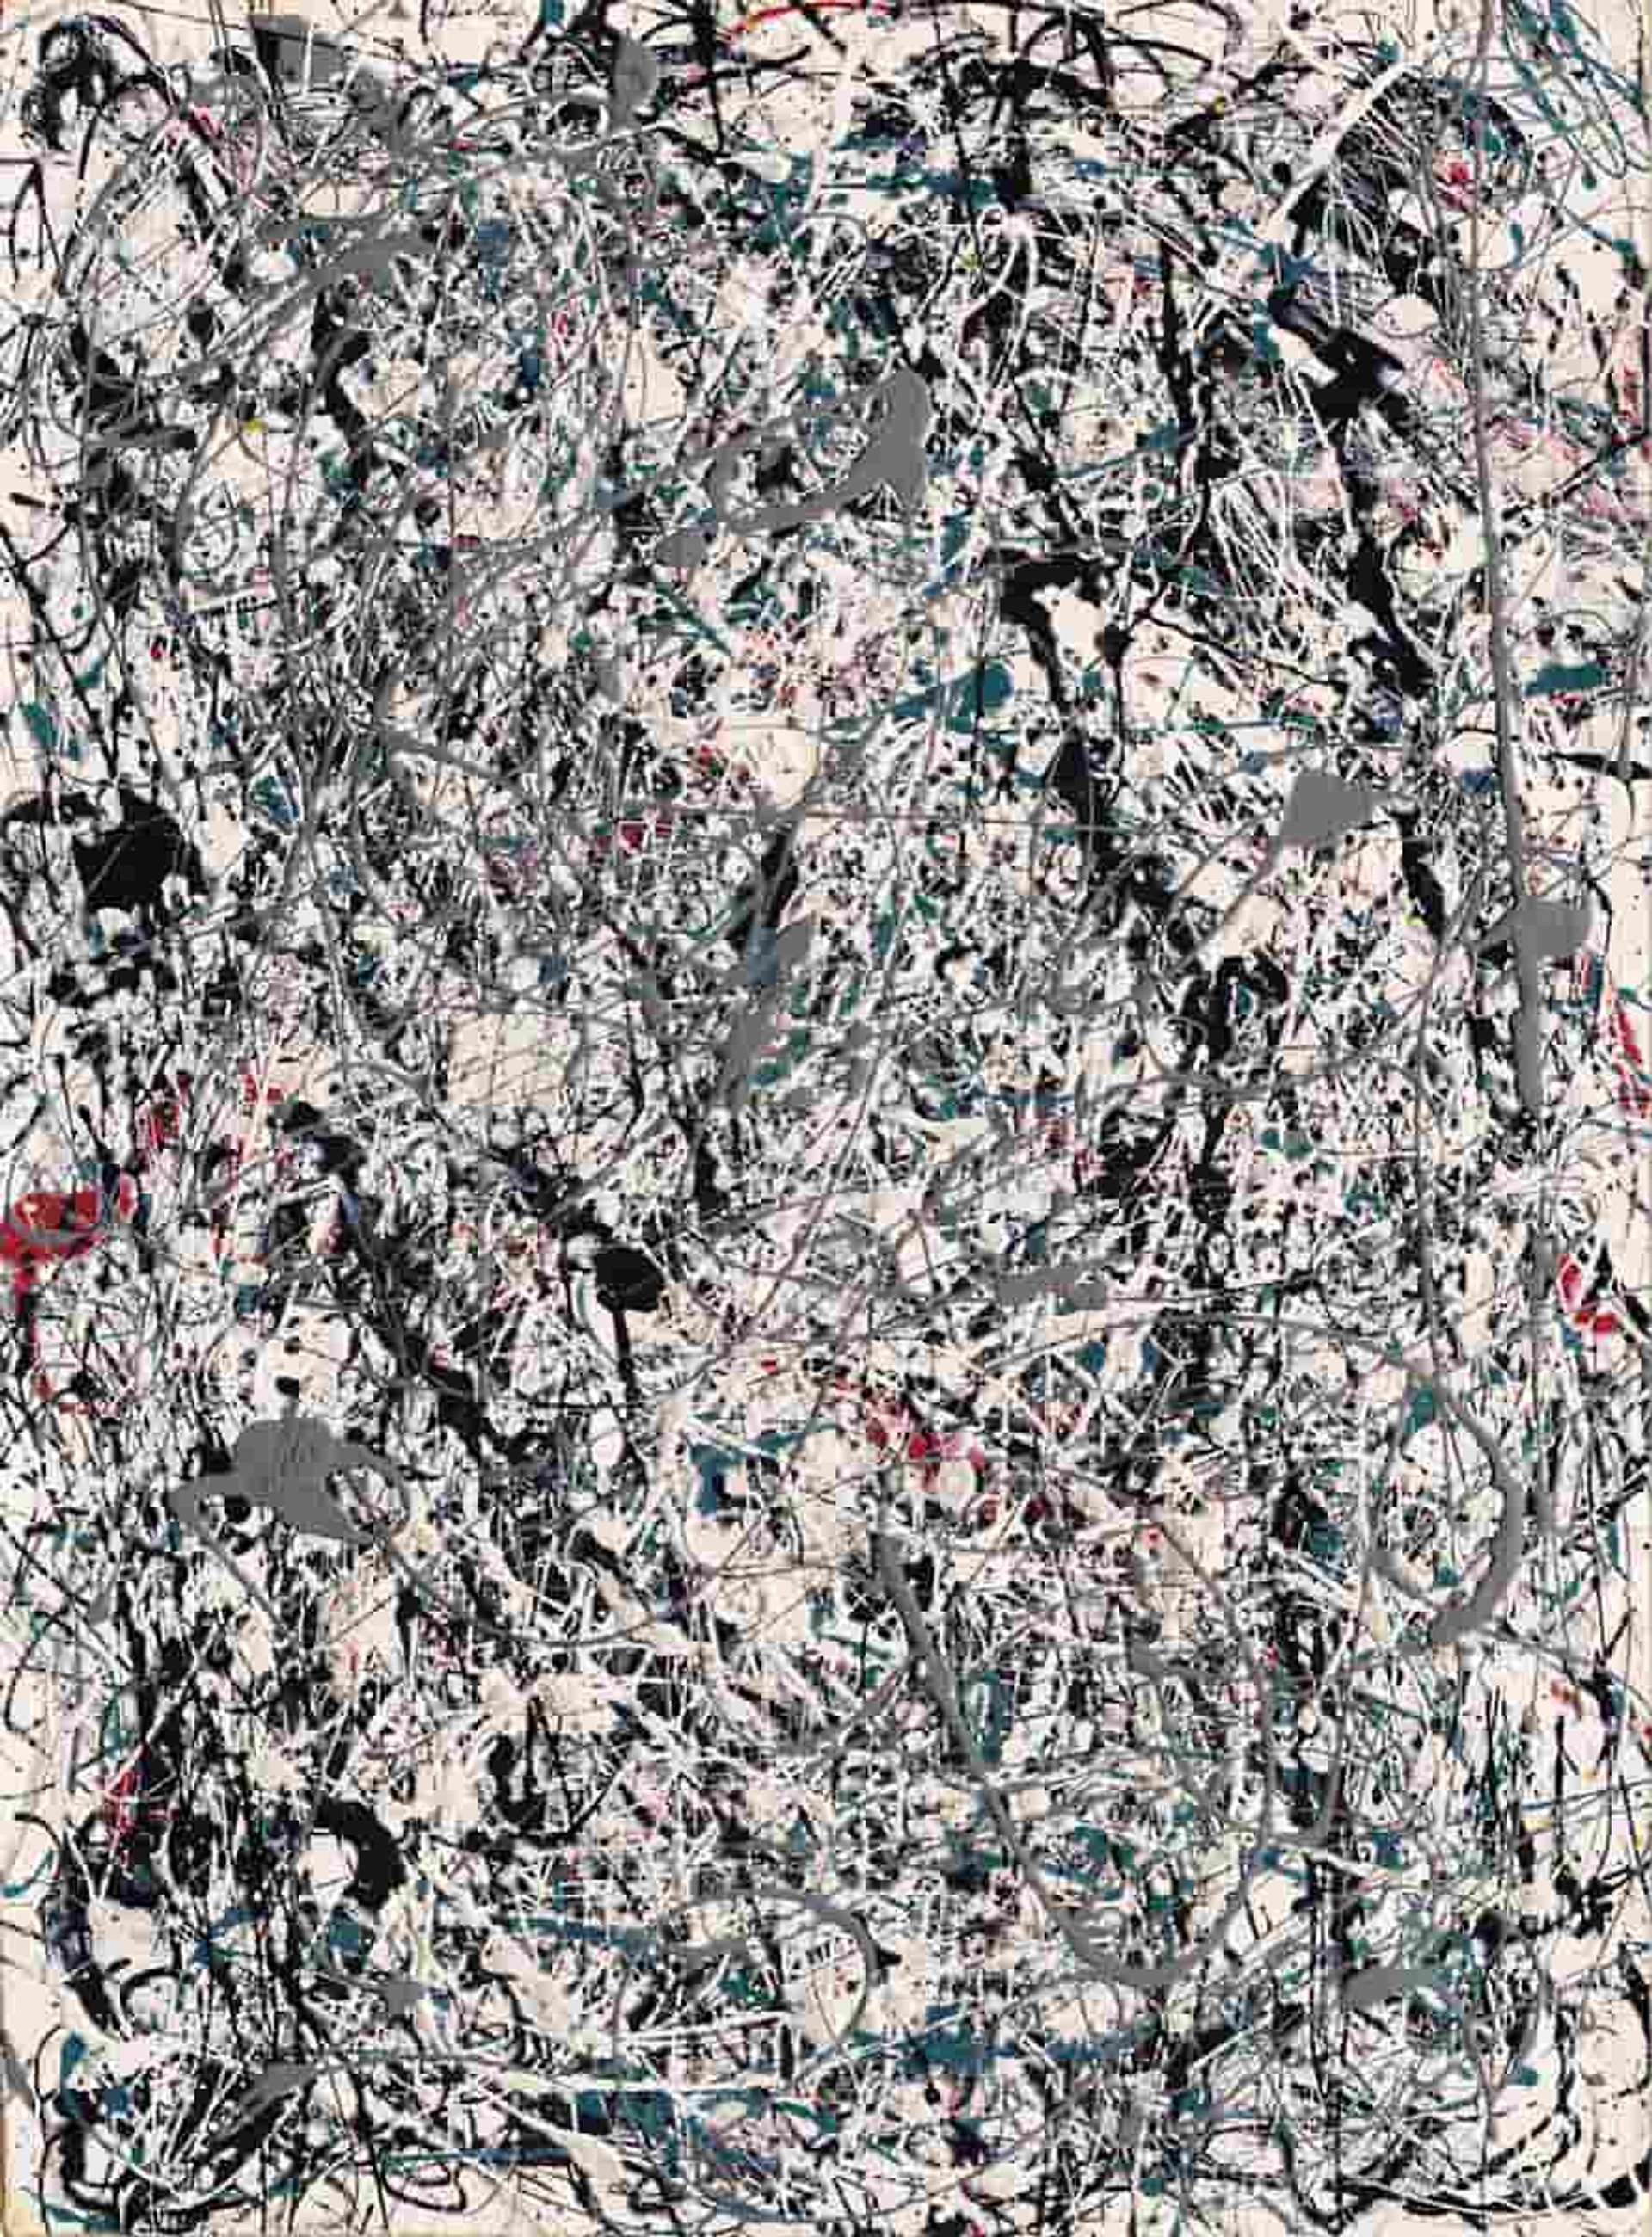 Number 19 by Jackson Pollock